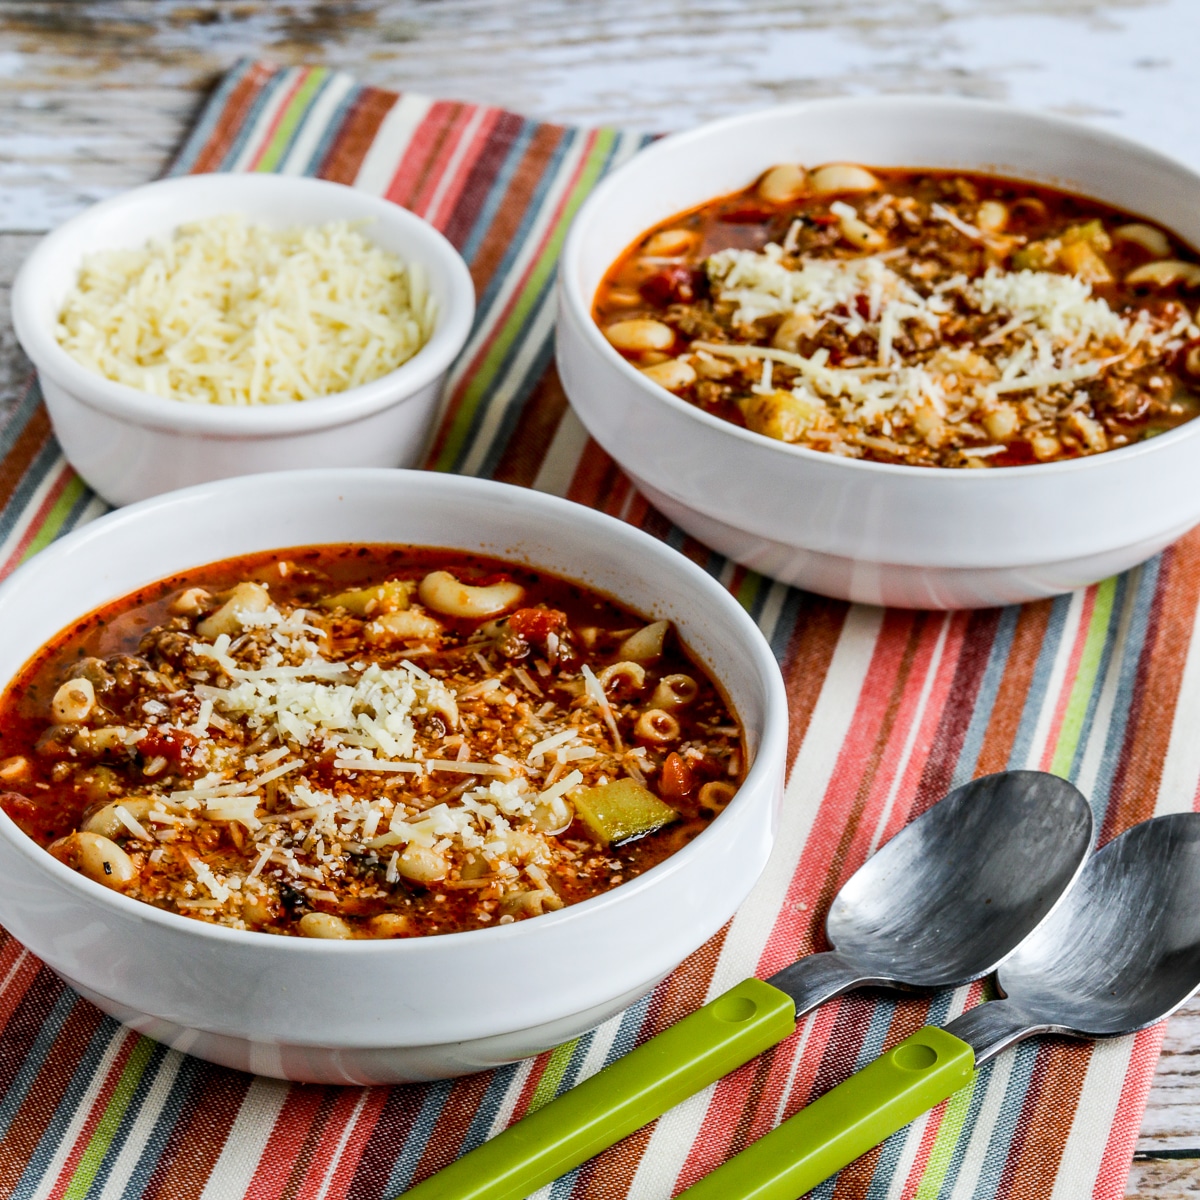 Square image of italian sausage, zucchini and macaroni soup, soup in two bowls, striped napkins, spoon and parmesan cheese.